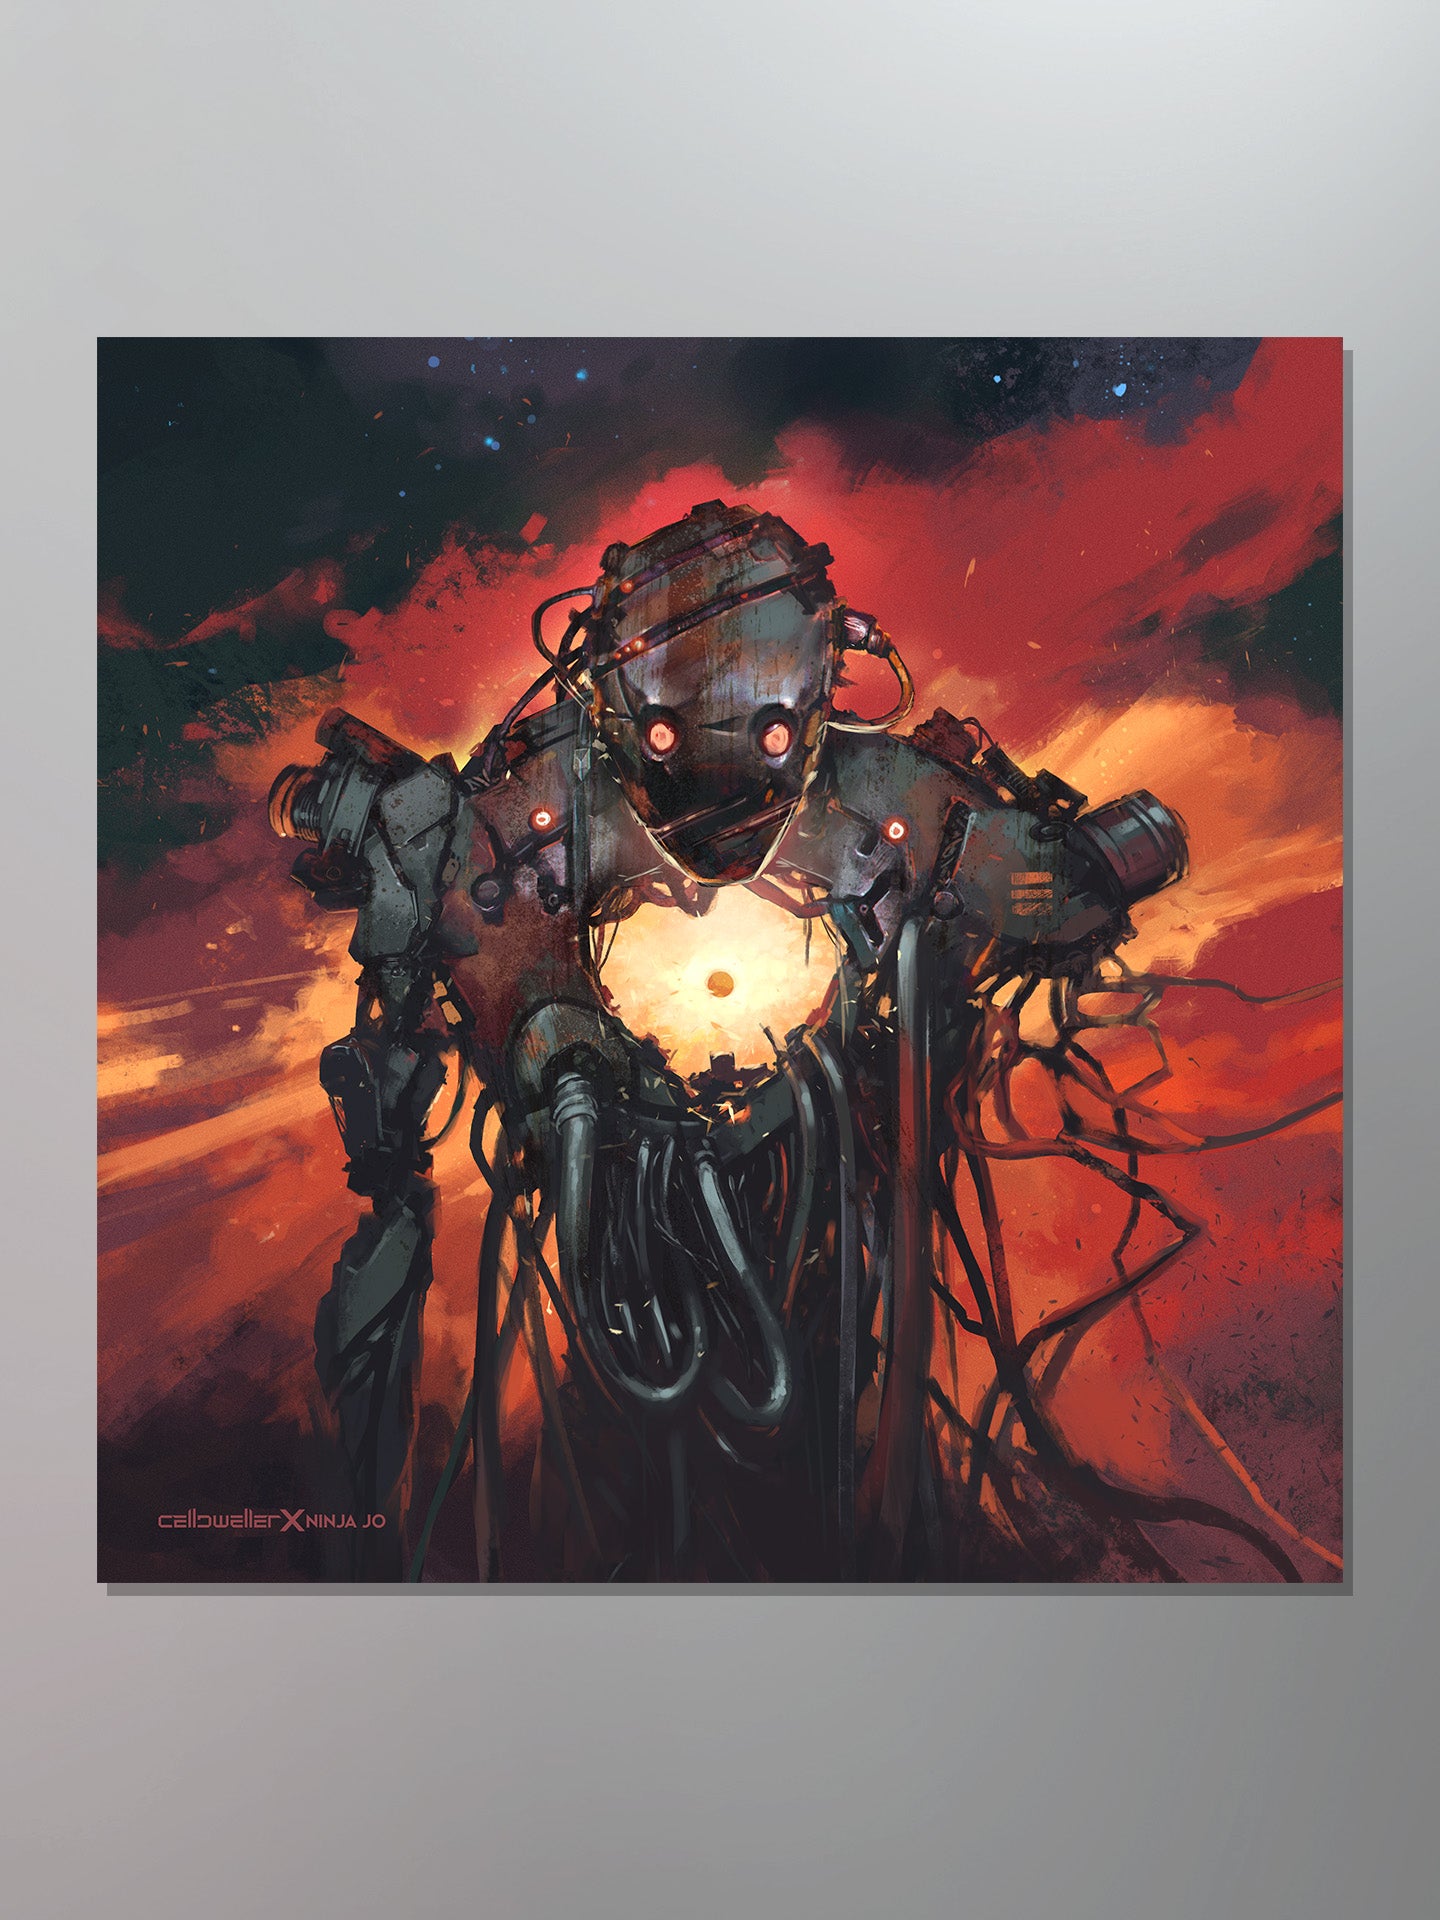 Celldweller - Into The Void [Limited Edition Giclee Print]